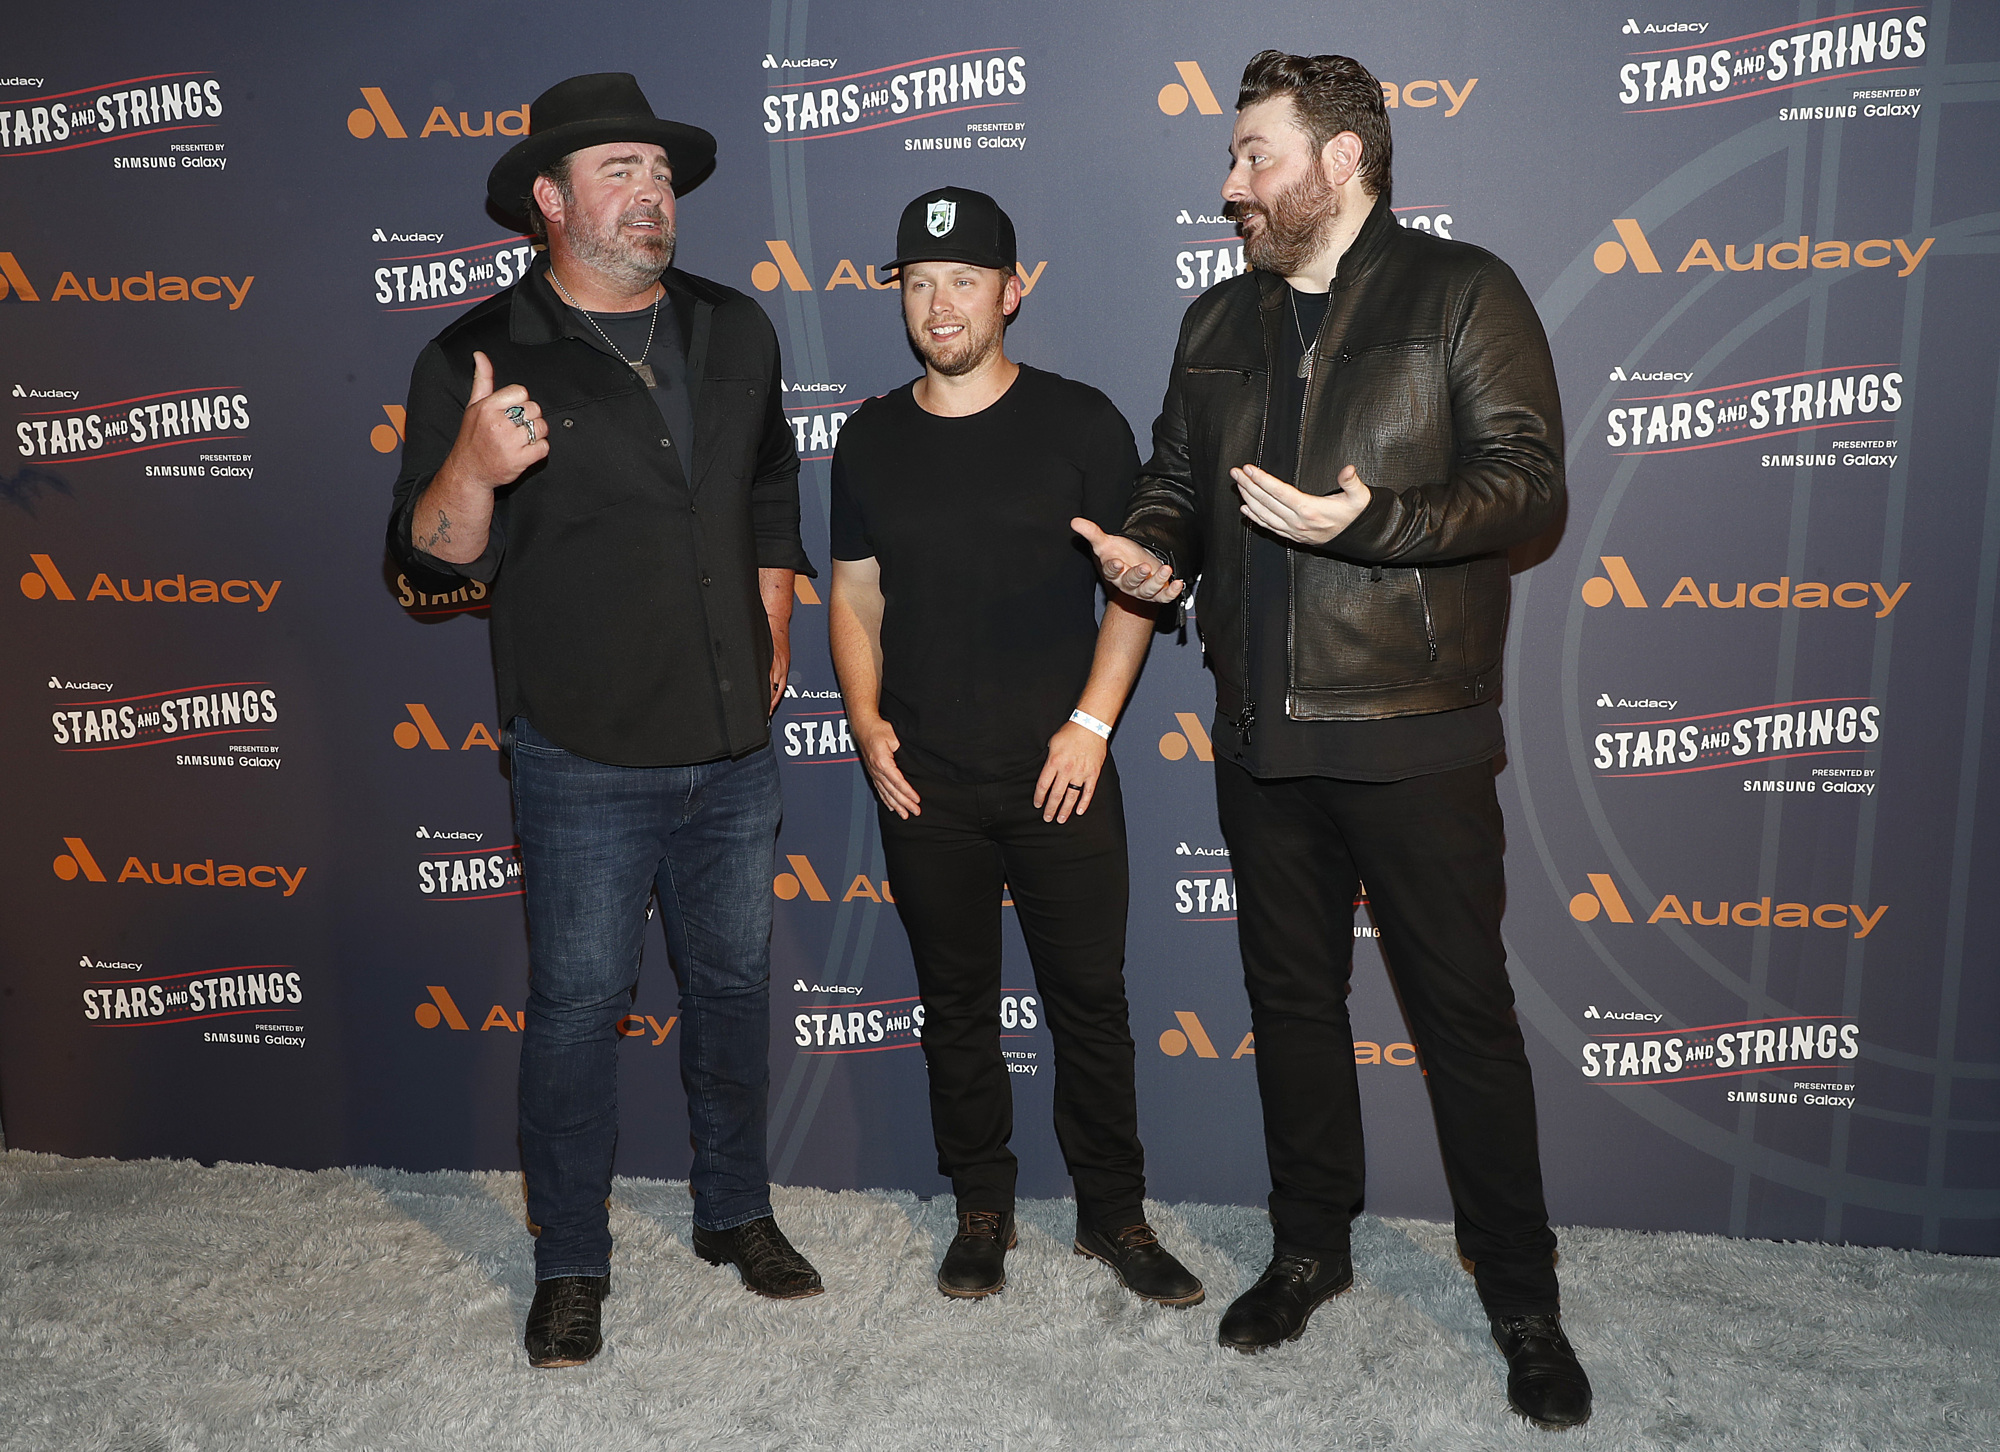 Lee Brice, Jameson Rodgers, Chris Young